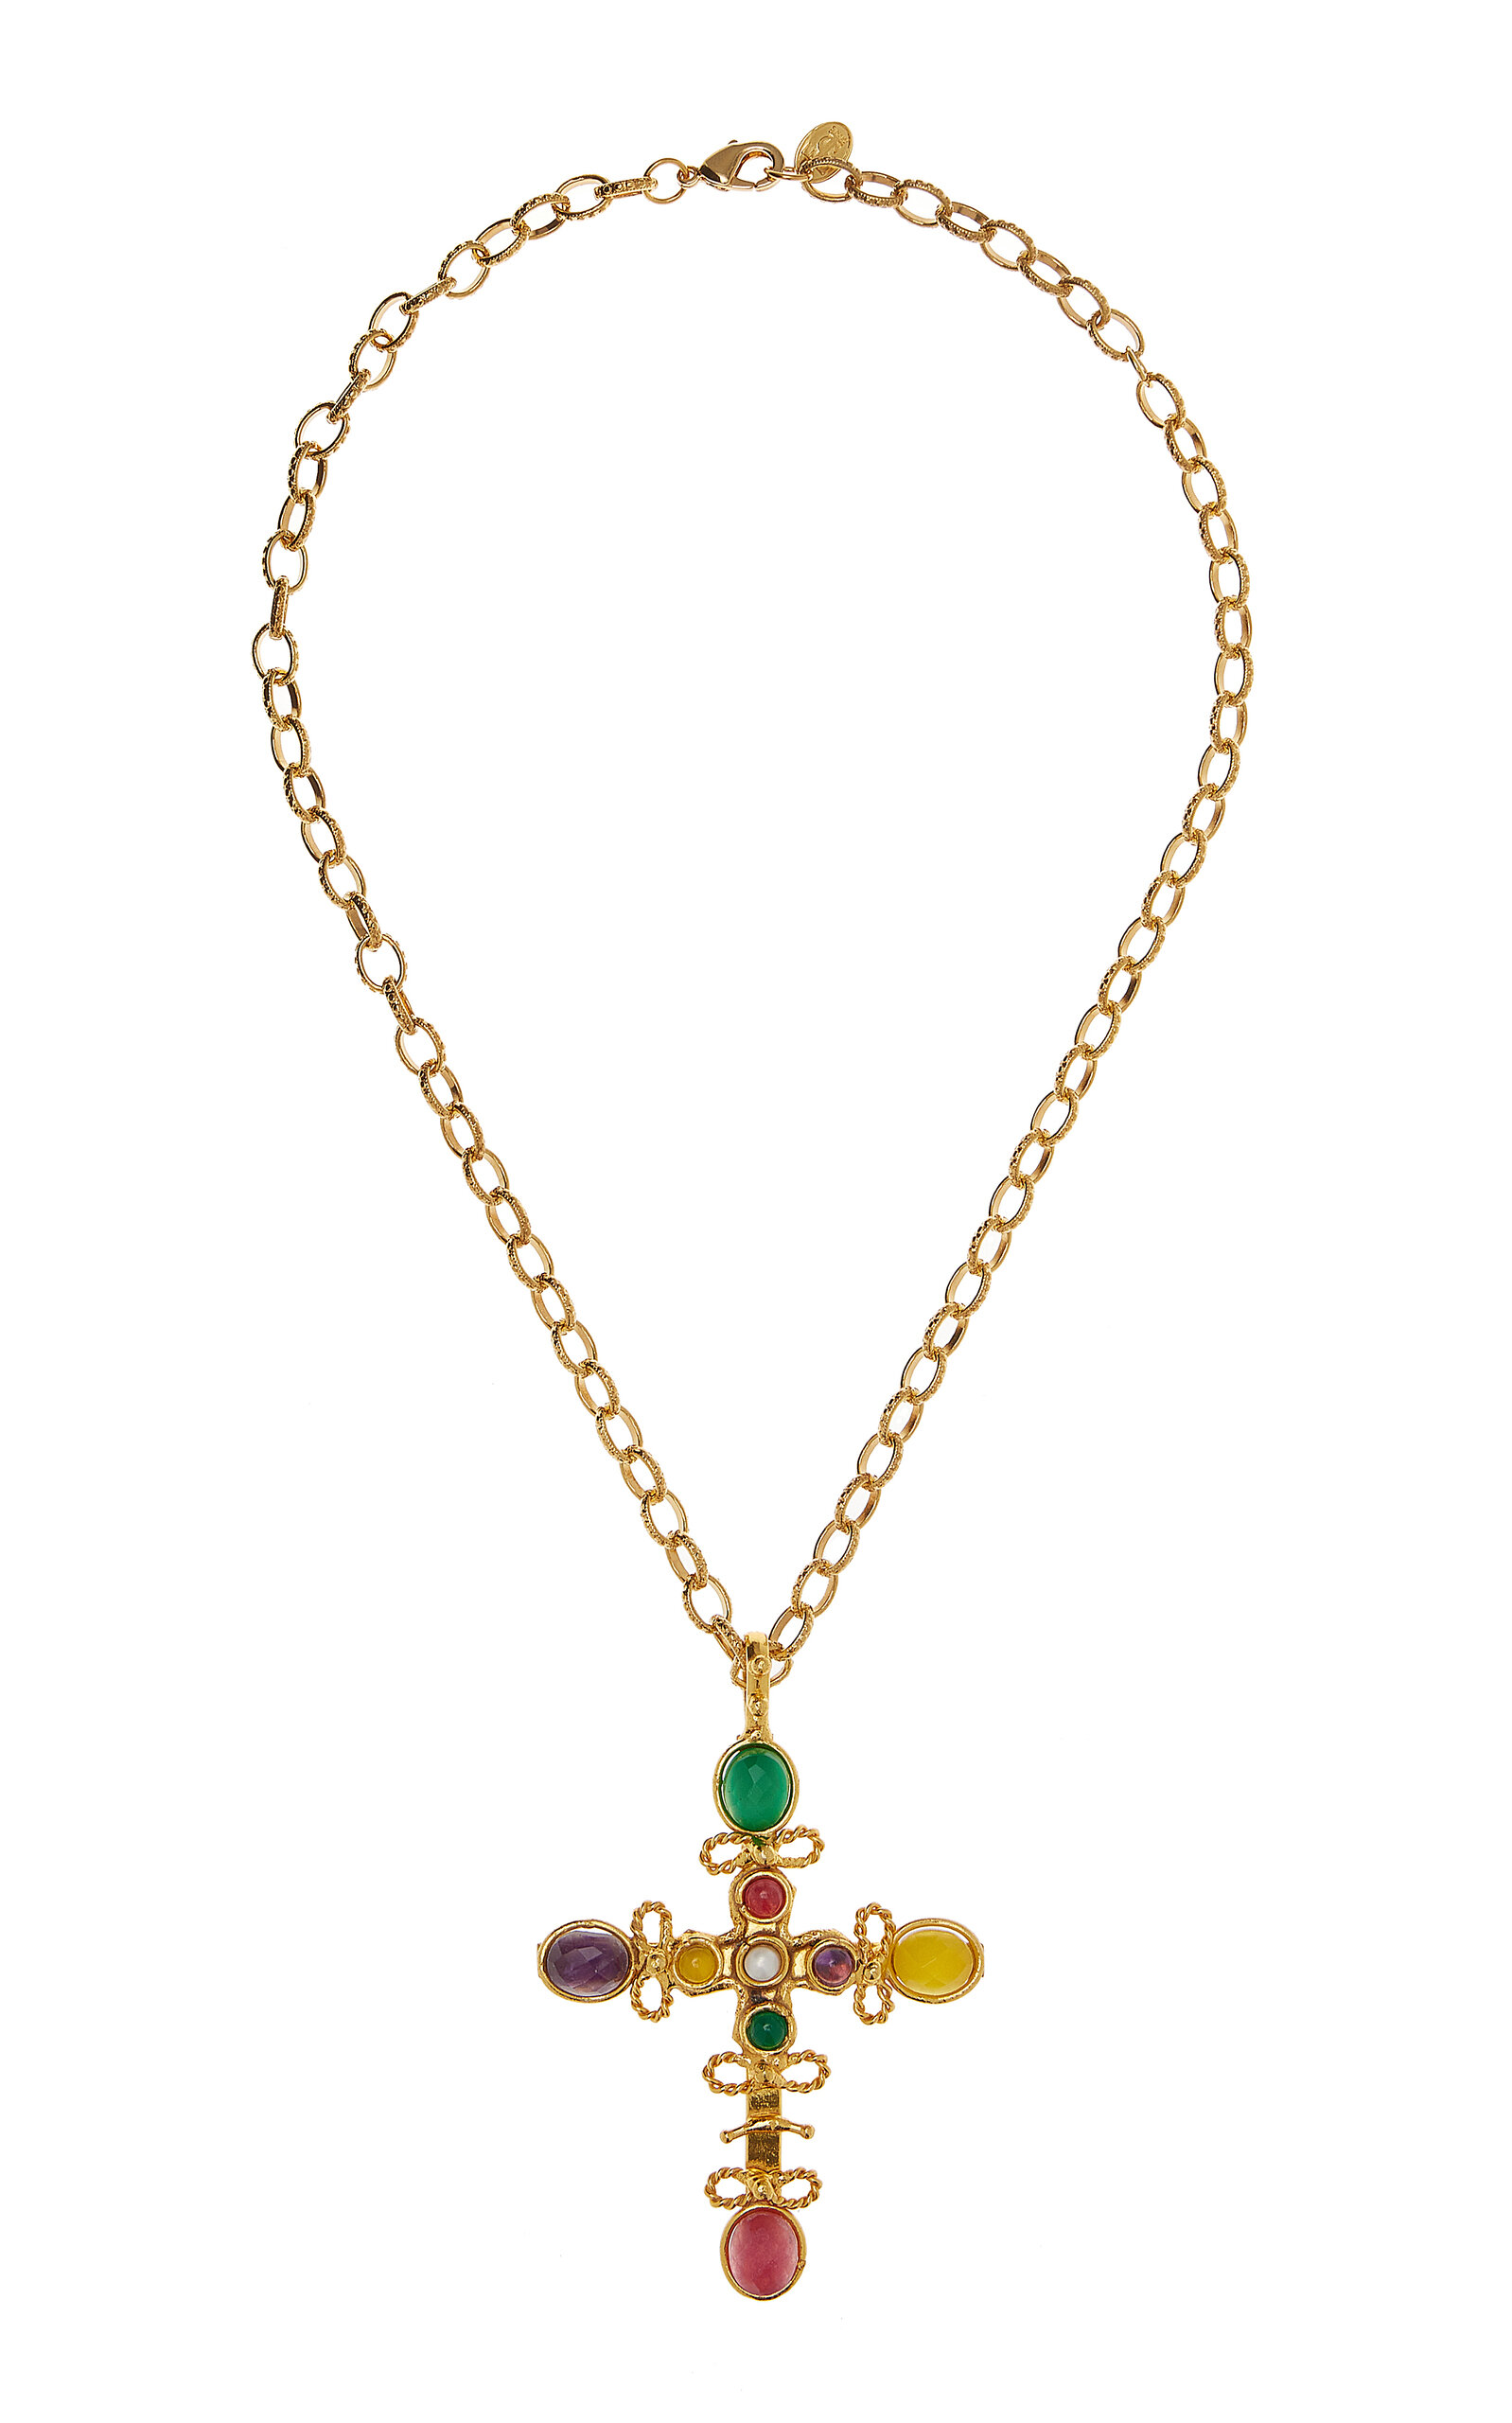 Cruise 22K Gold-Plated Multi-Stone Necklace